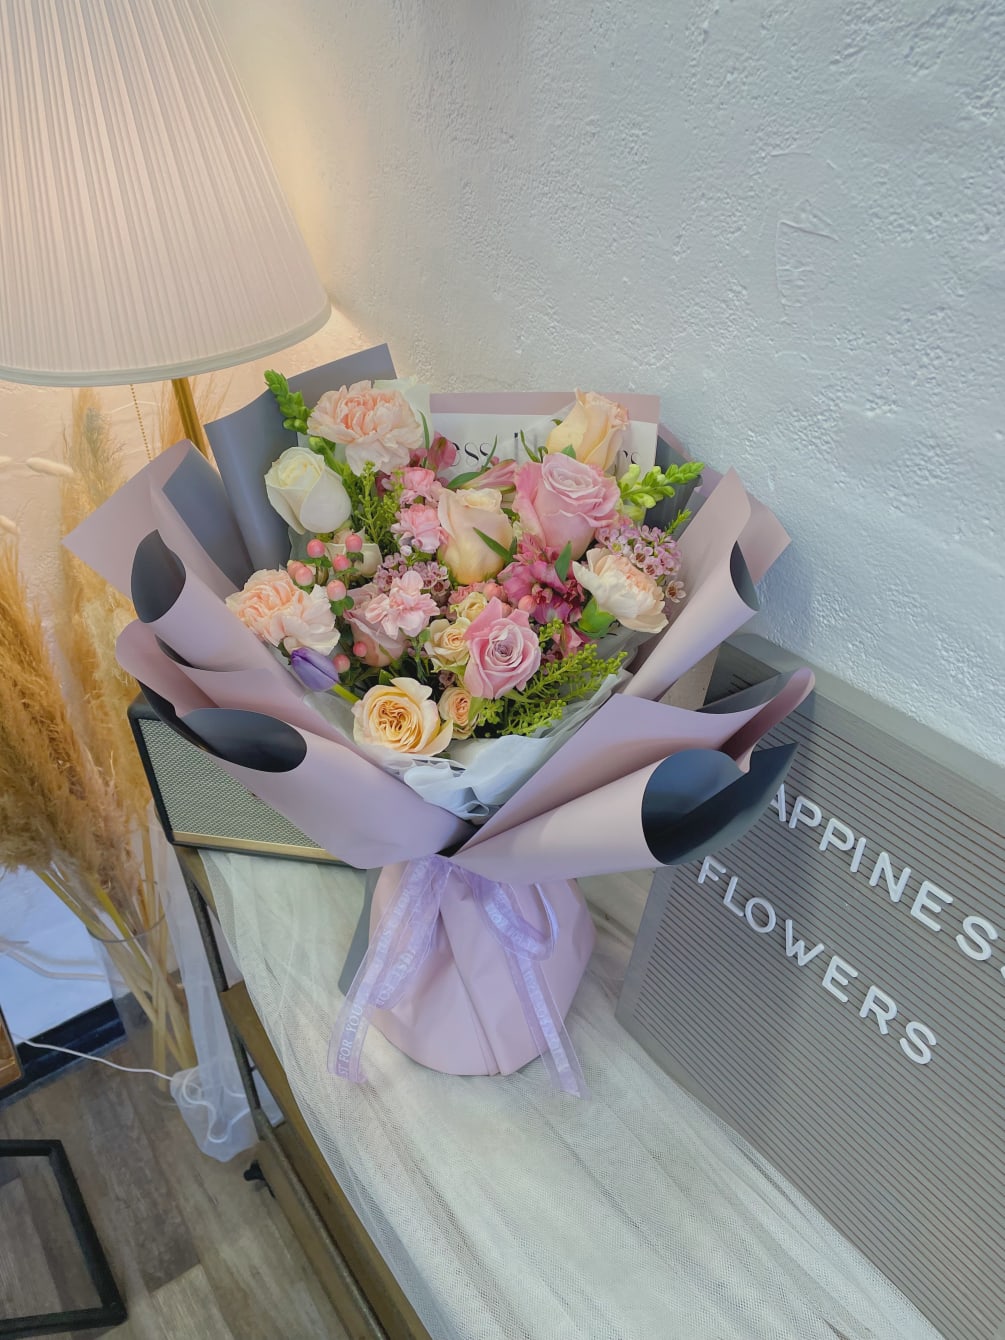 Flower Bouquet by Happiness Flowers